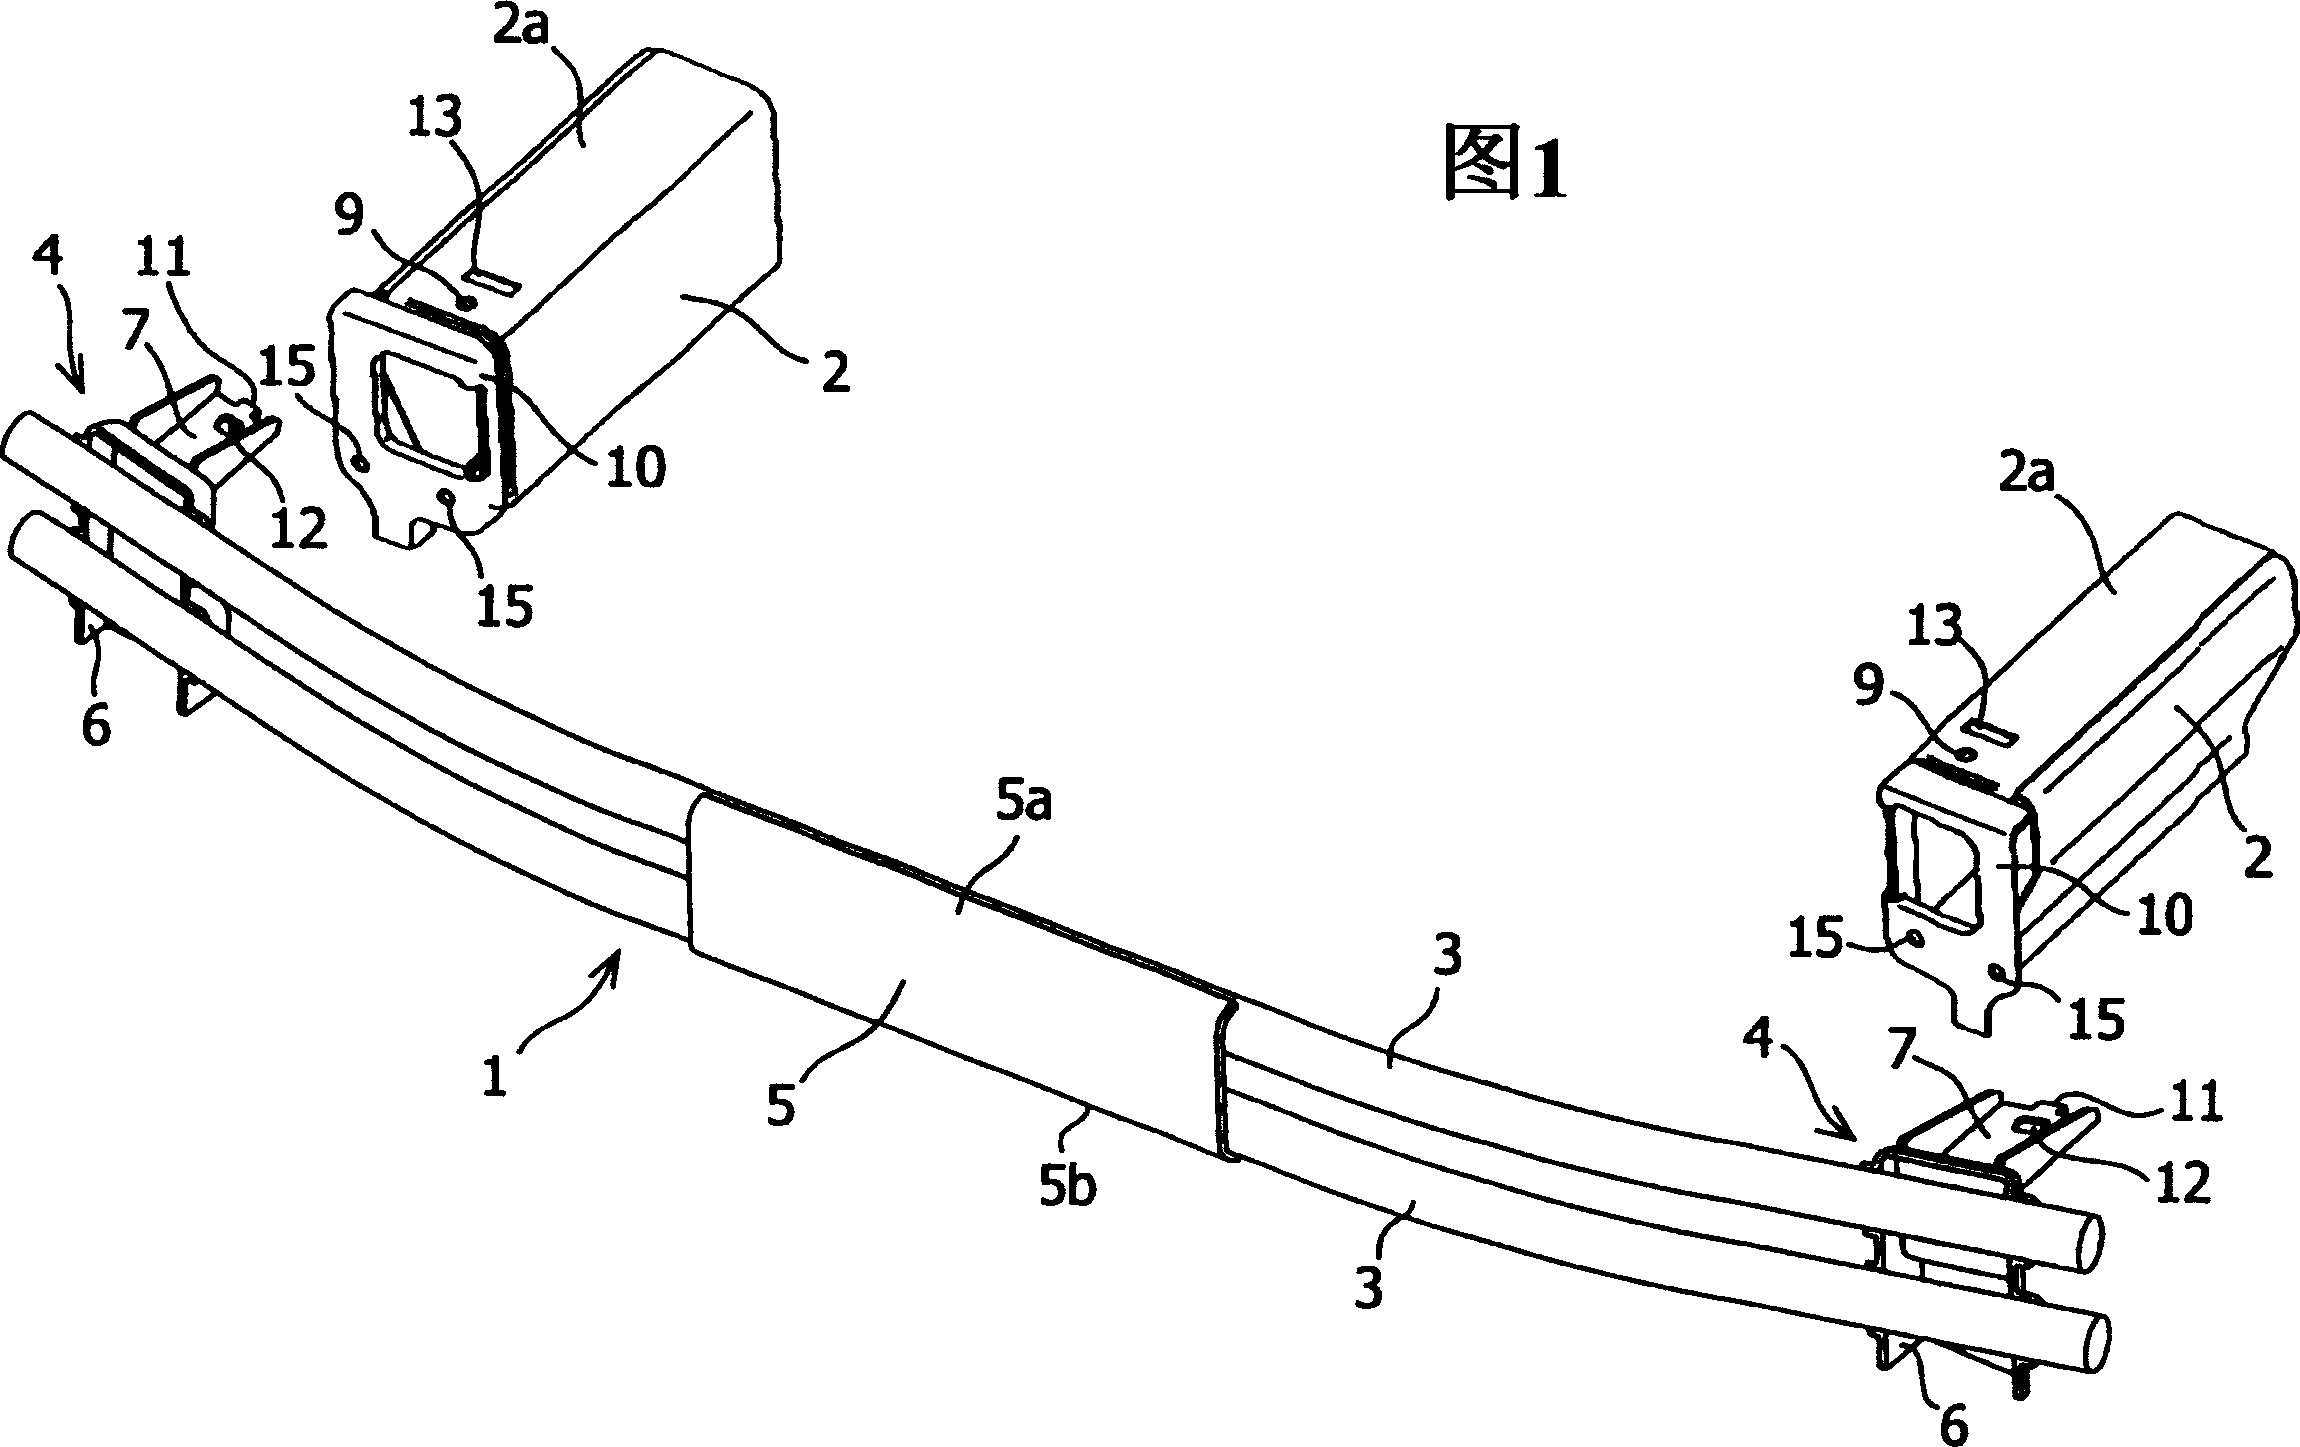 Mounting structure of bumper beam